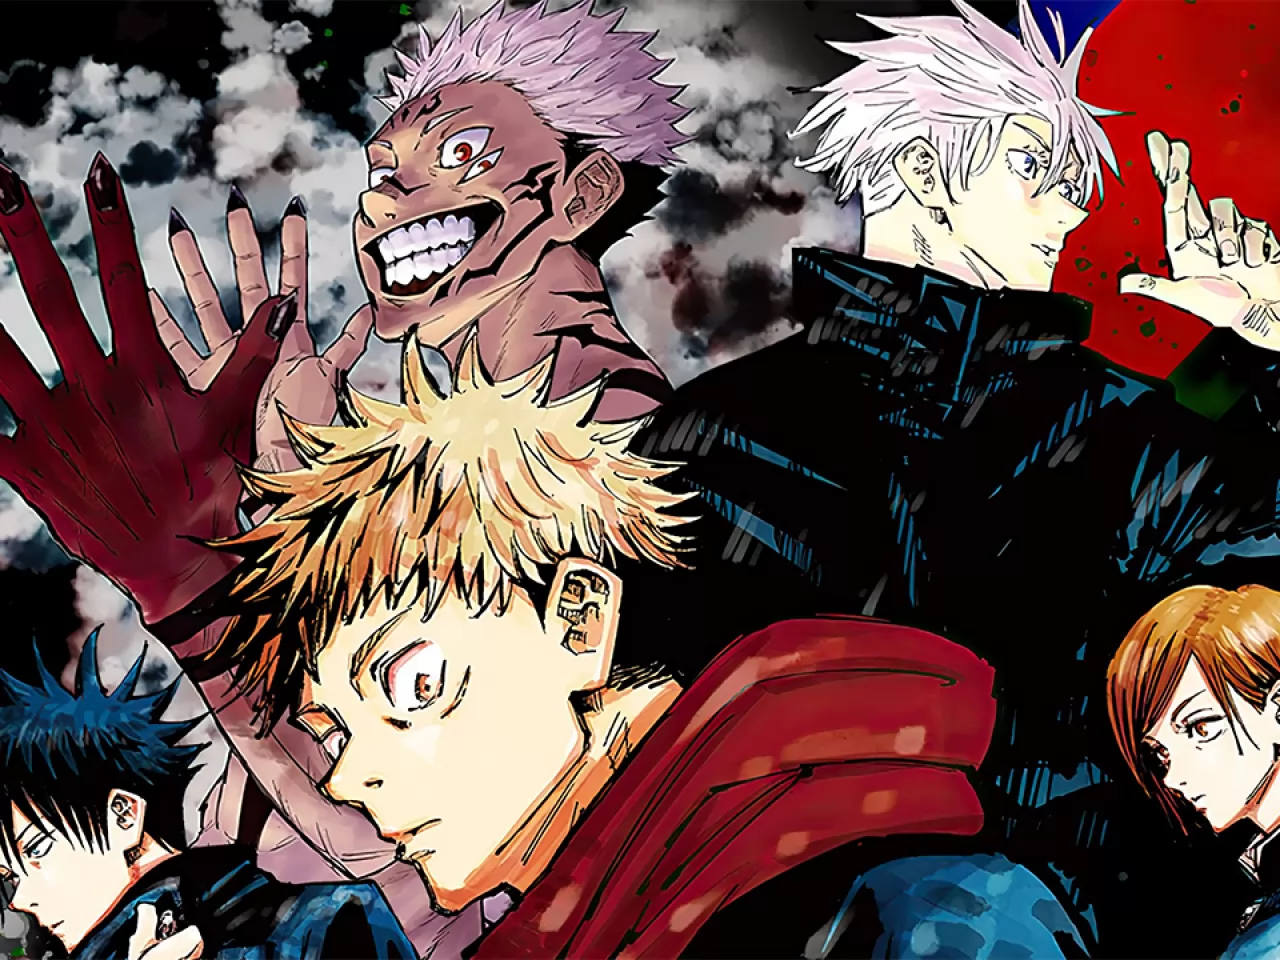 Exclusive Peek Jujutsu Kaisen Series Finale Plans Unveiled by Creator and Editor - What Fans Can Expect